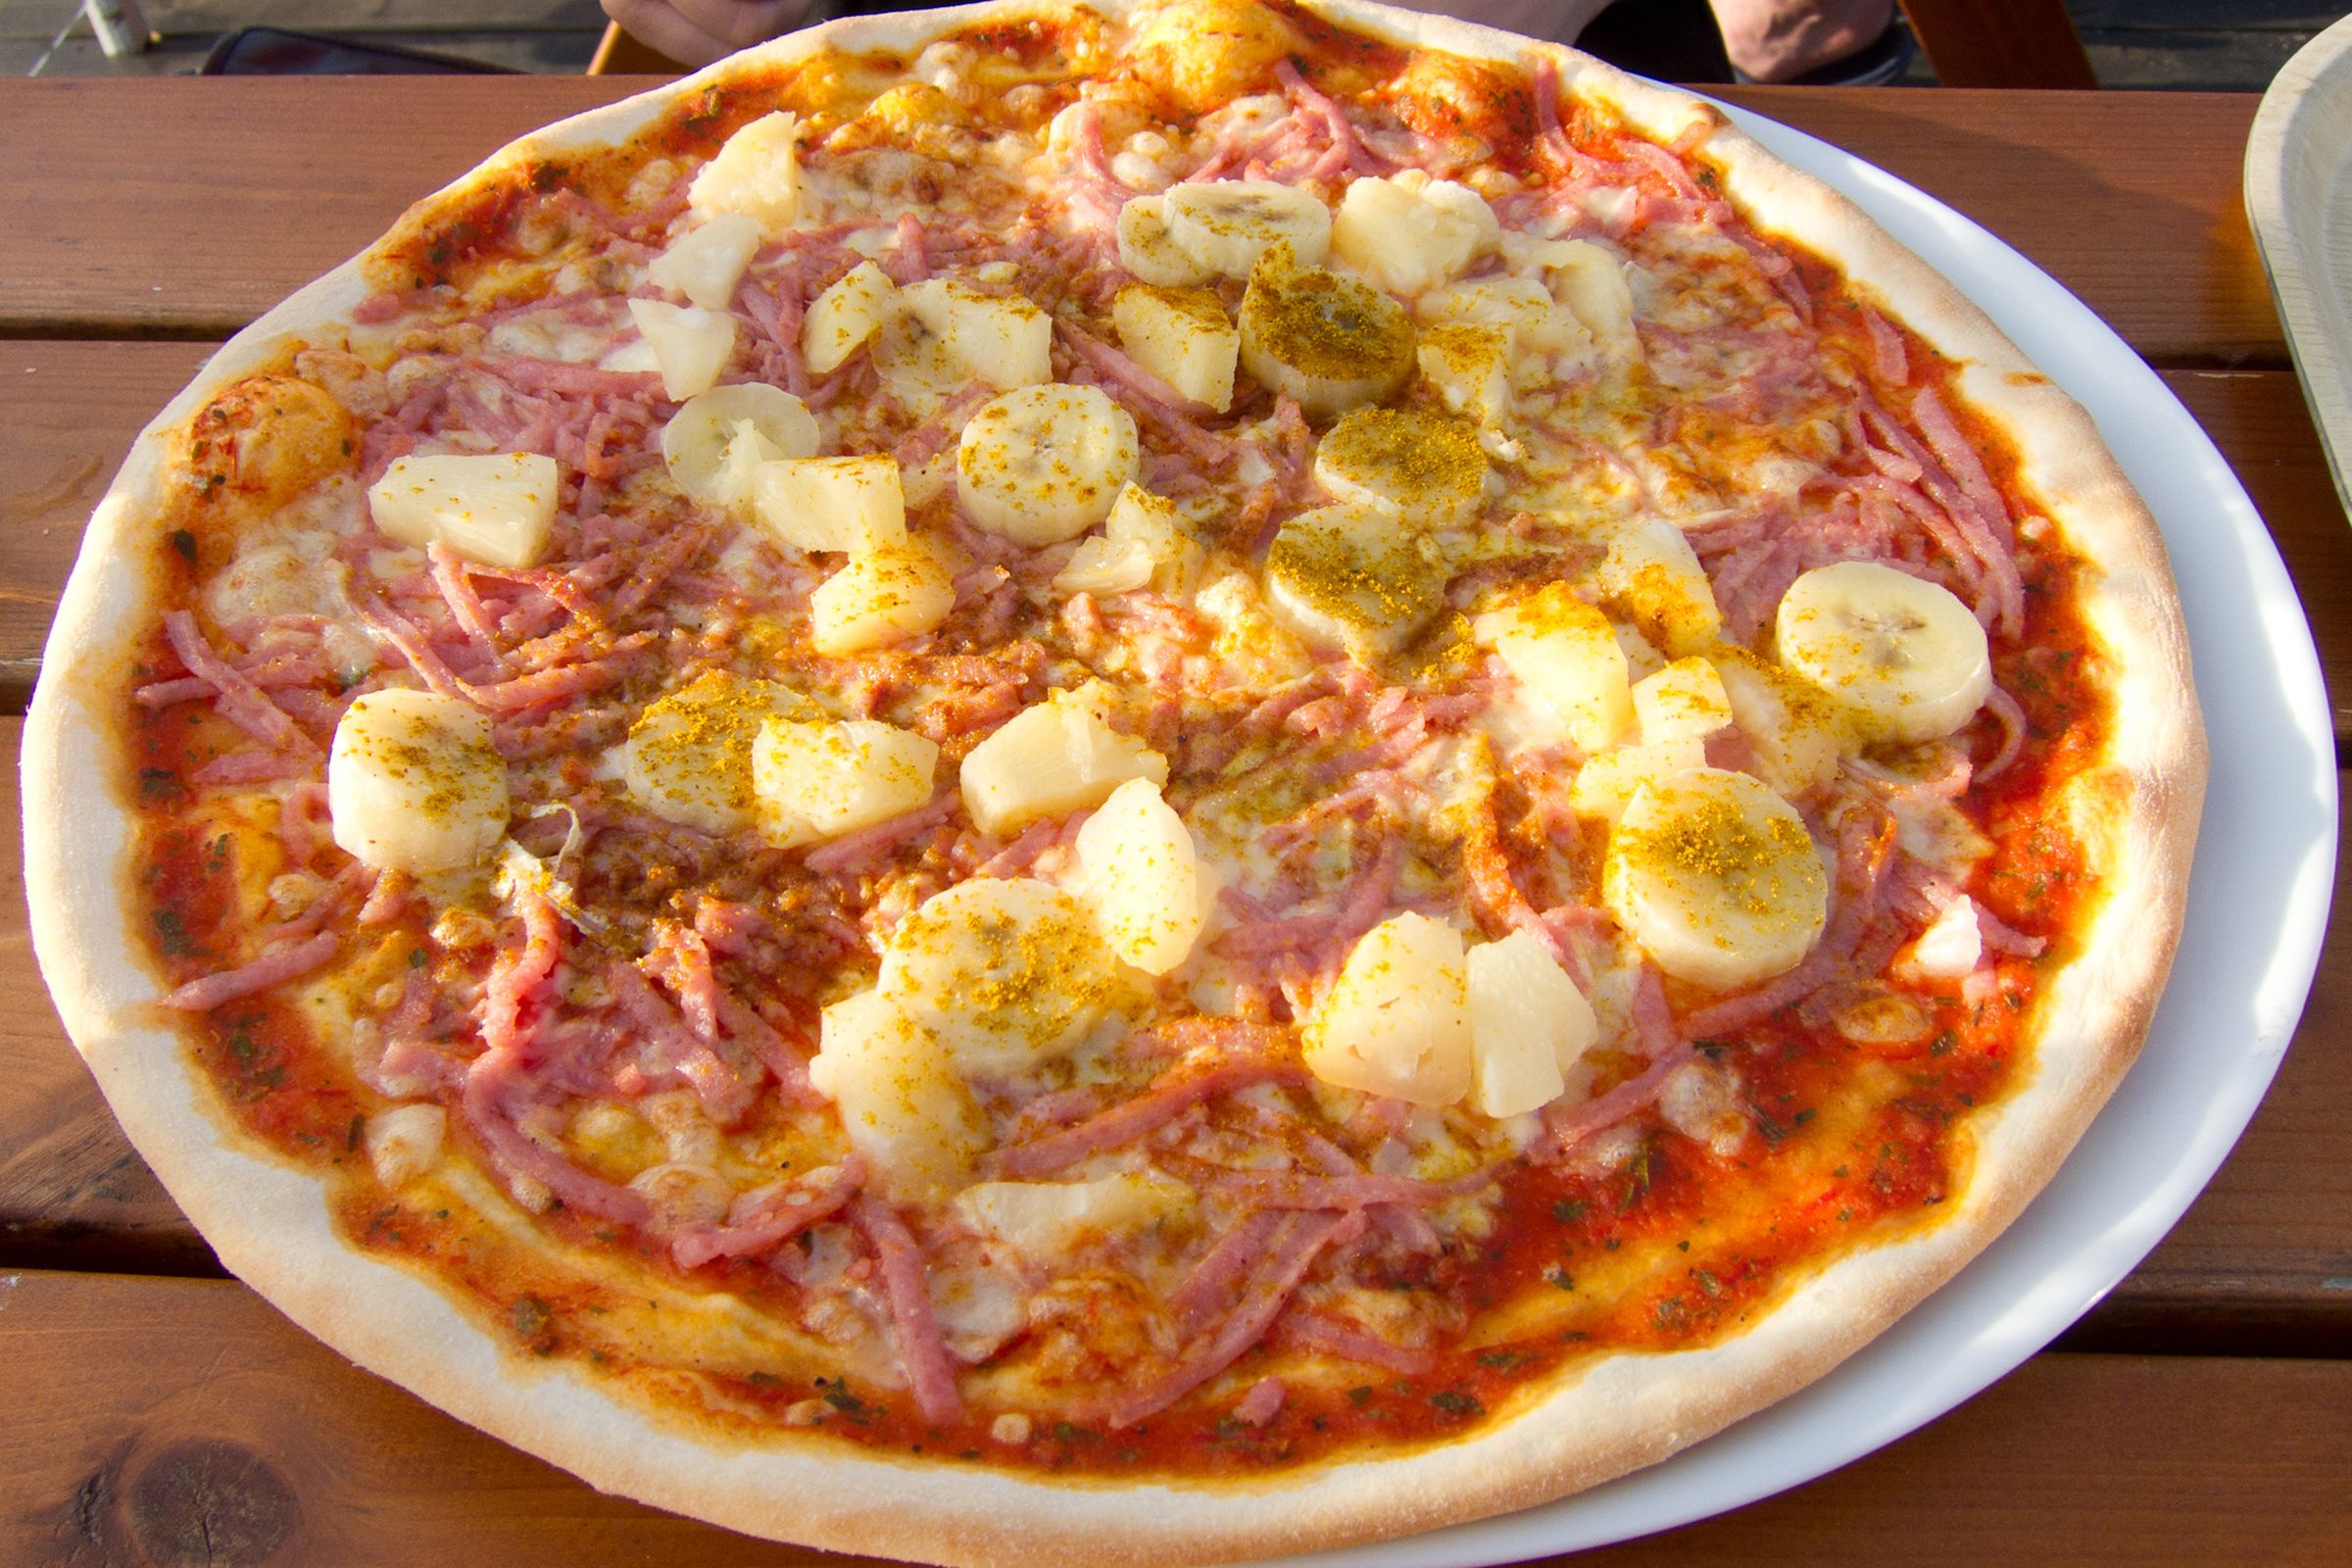 Bananas, pineapple, curry powder, and ham on a pizza 